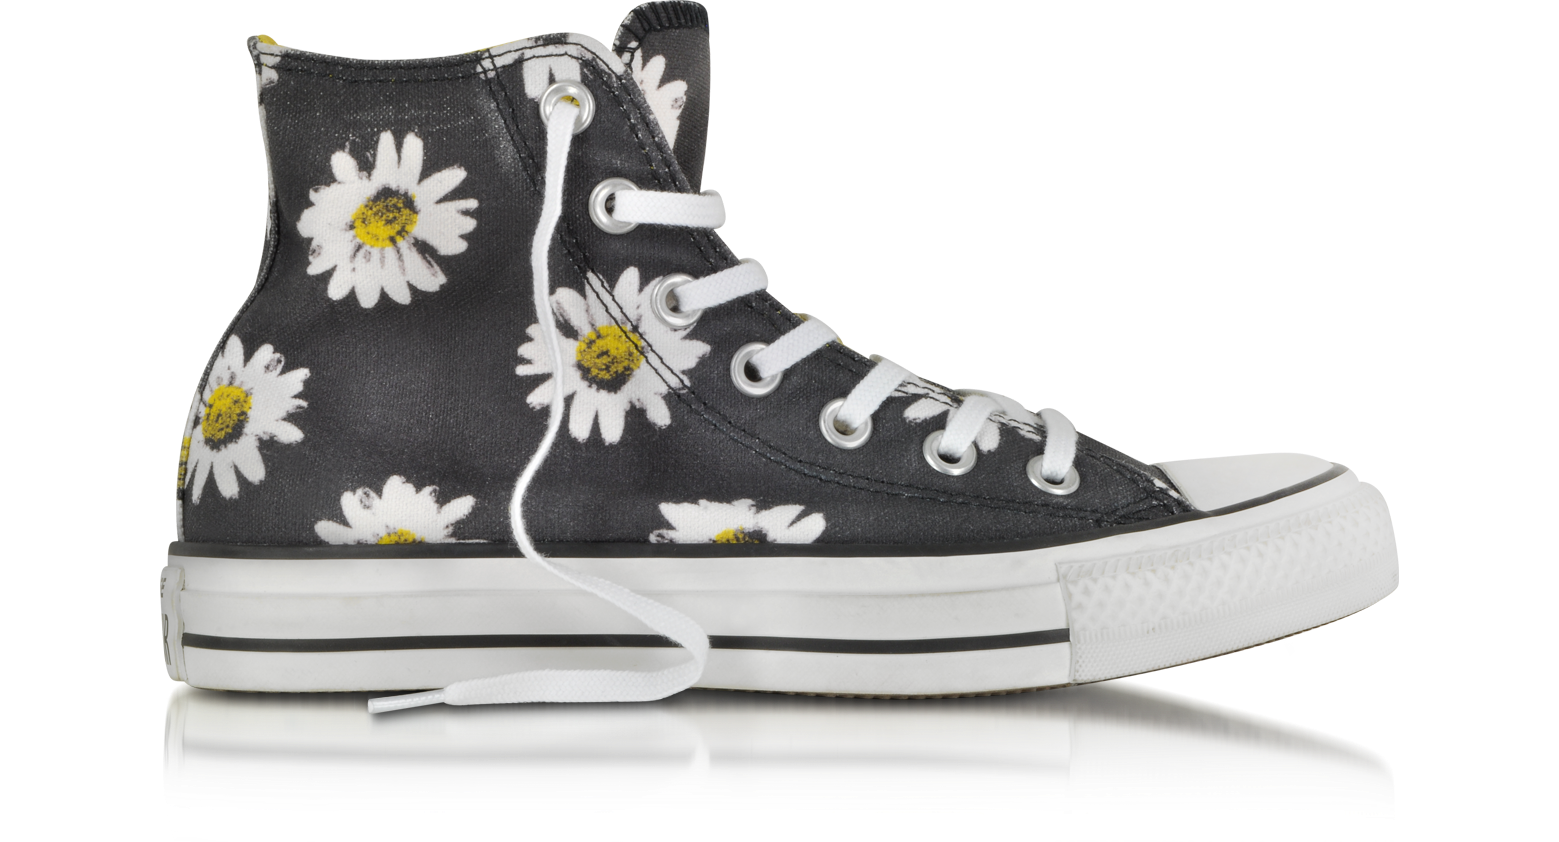 Converse Limited Edition Chuck Taylor All Star Black and Citrus Daisy  Printed Canvas High Top Sneaker 3.5 UK at FORZIERI